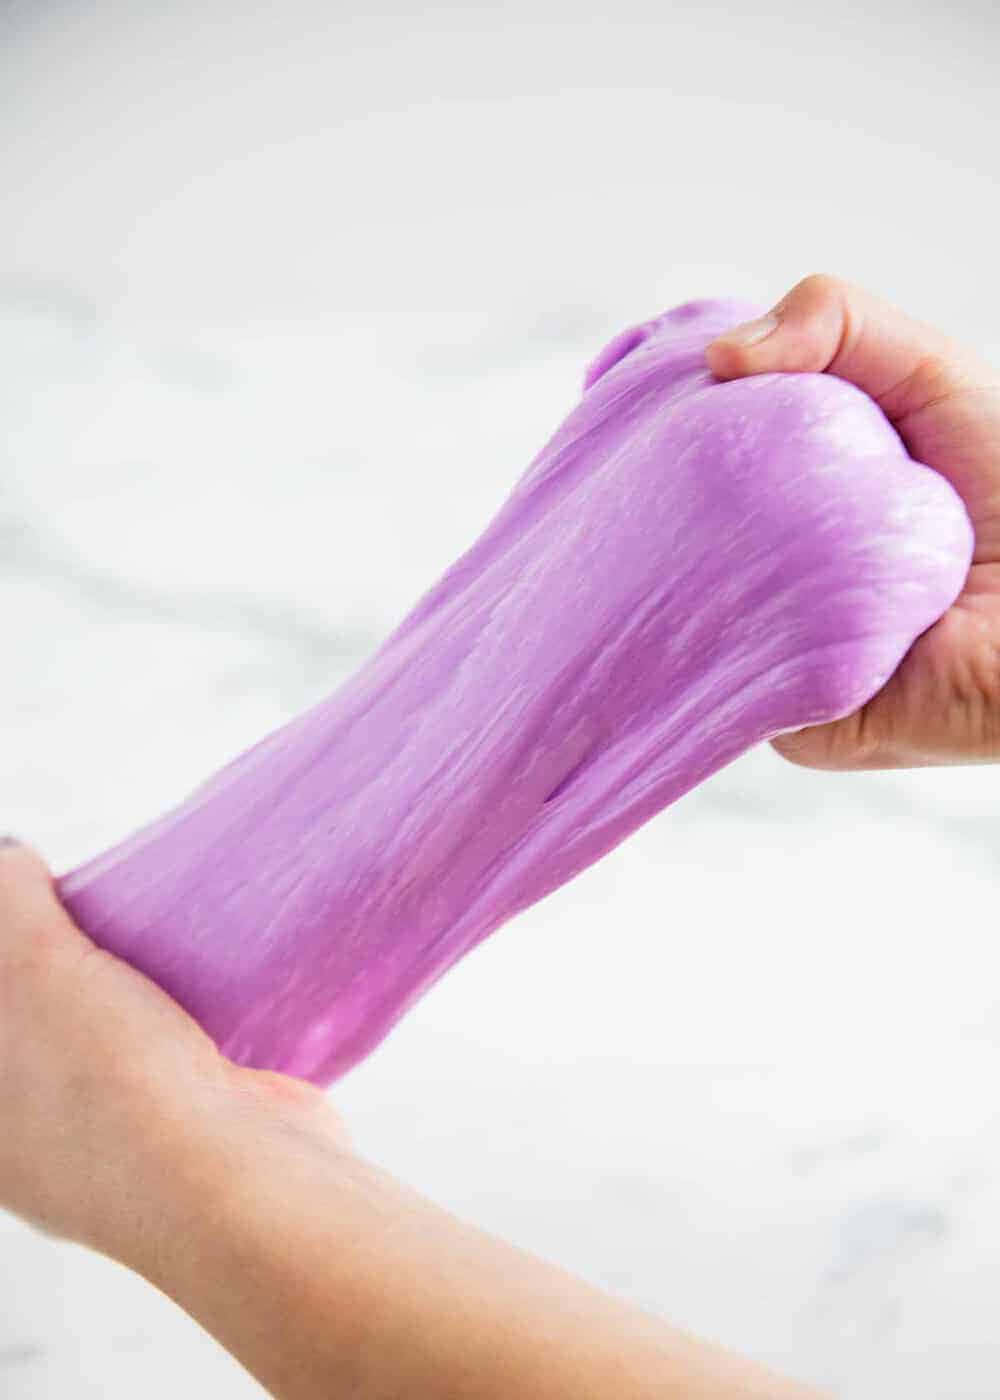 A Person Is Holding A Purple Slime Ball